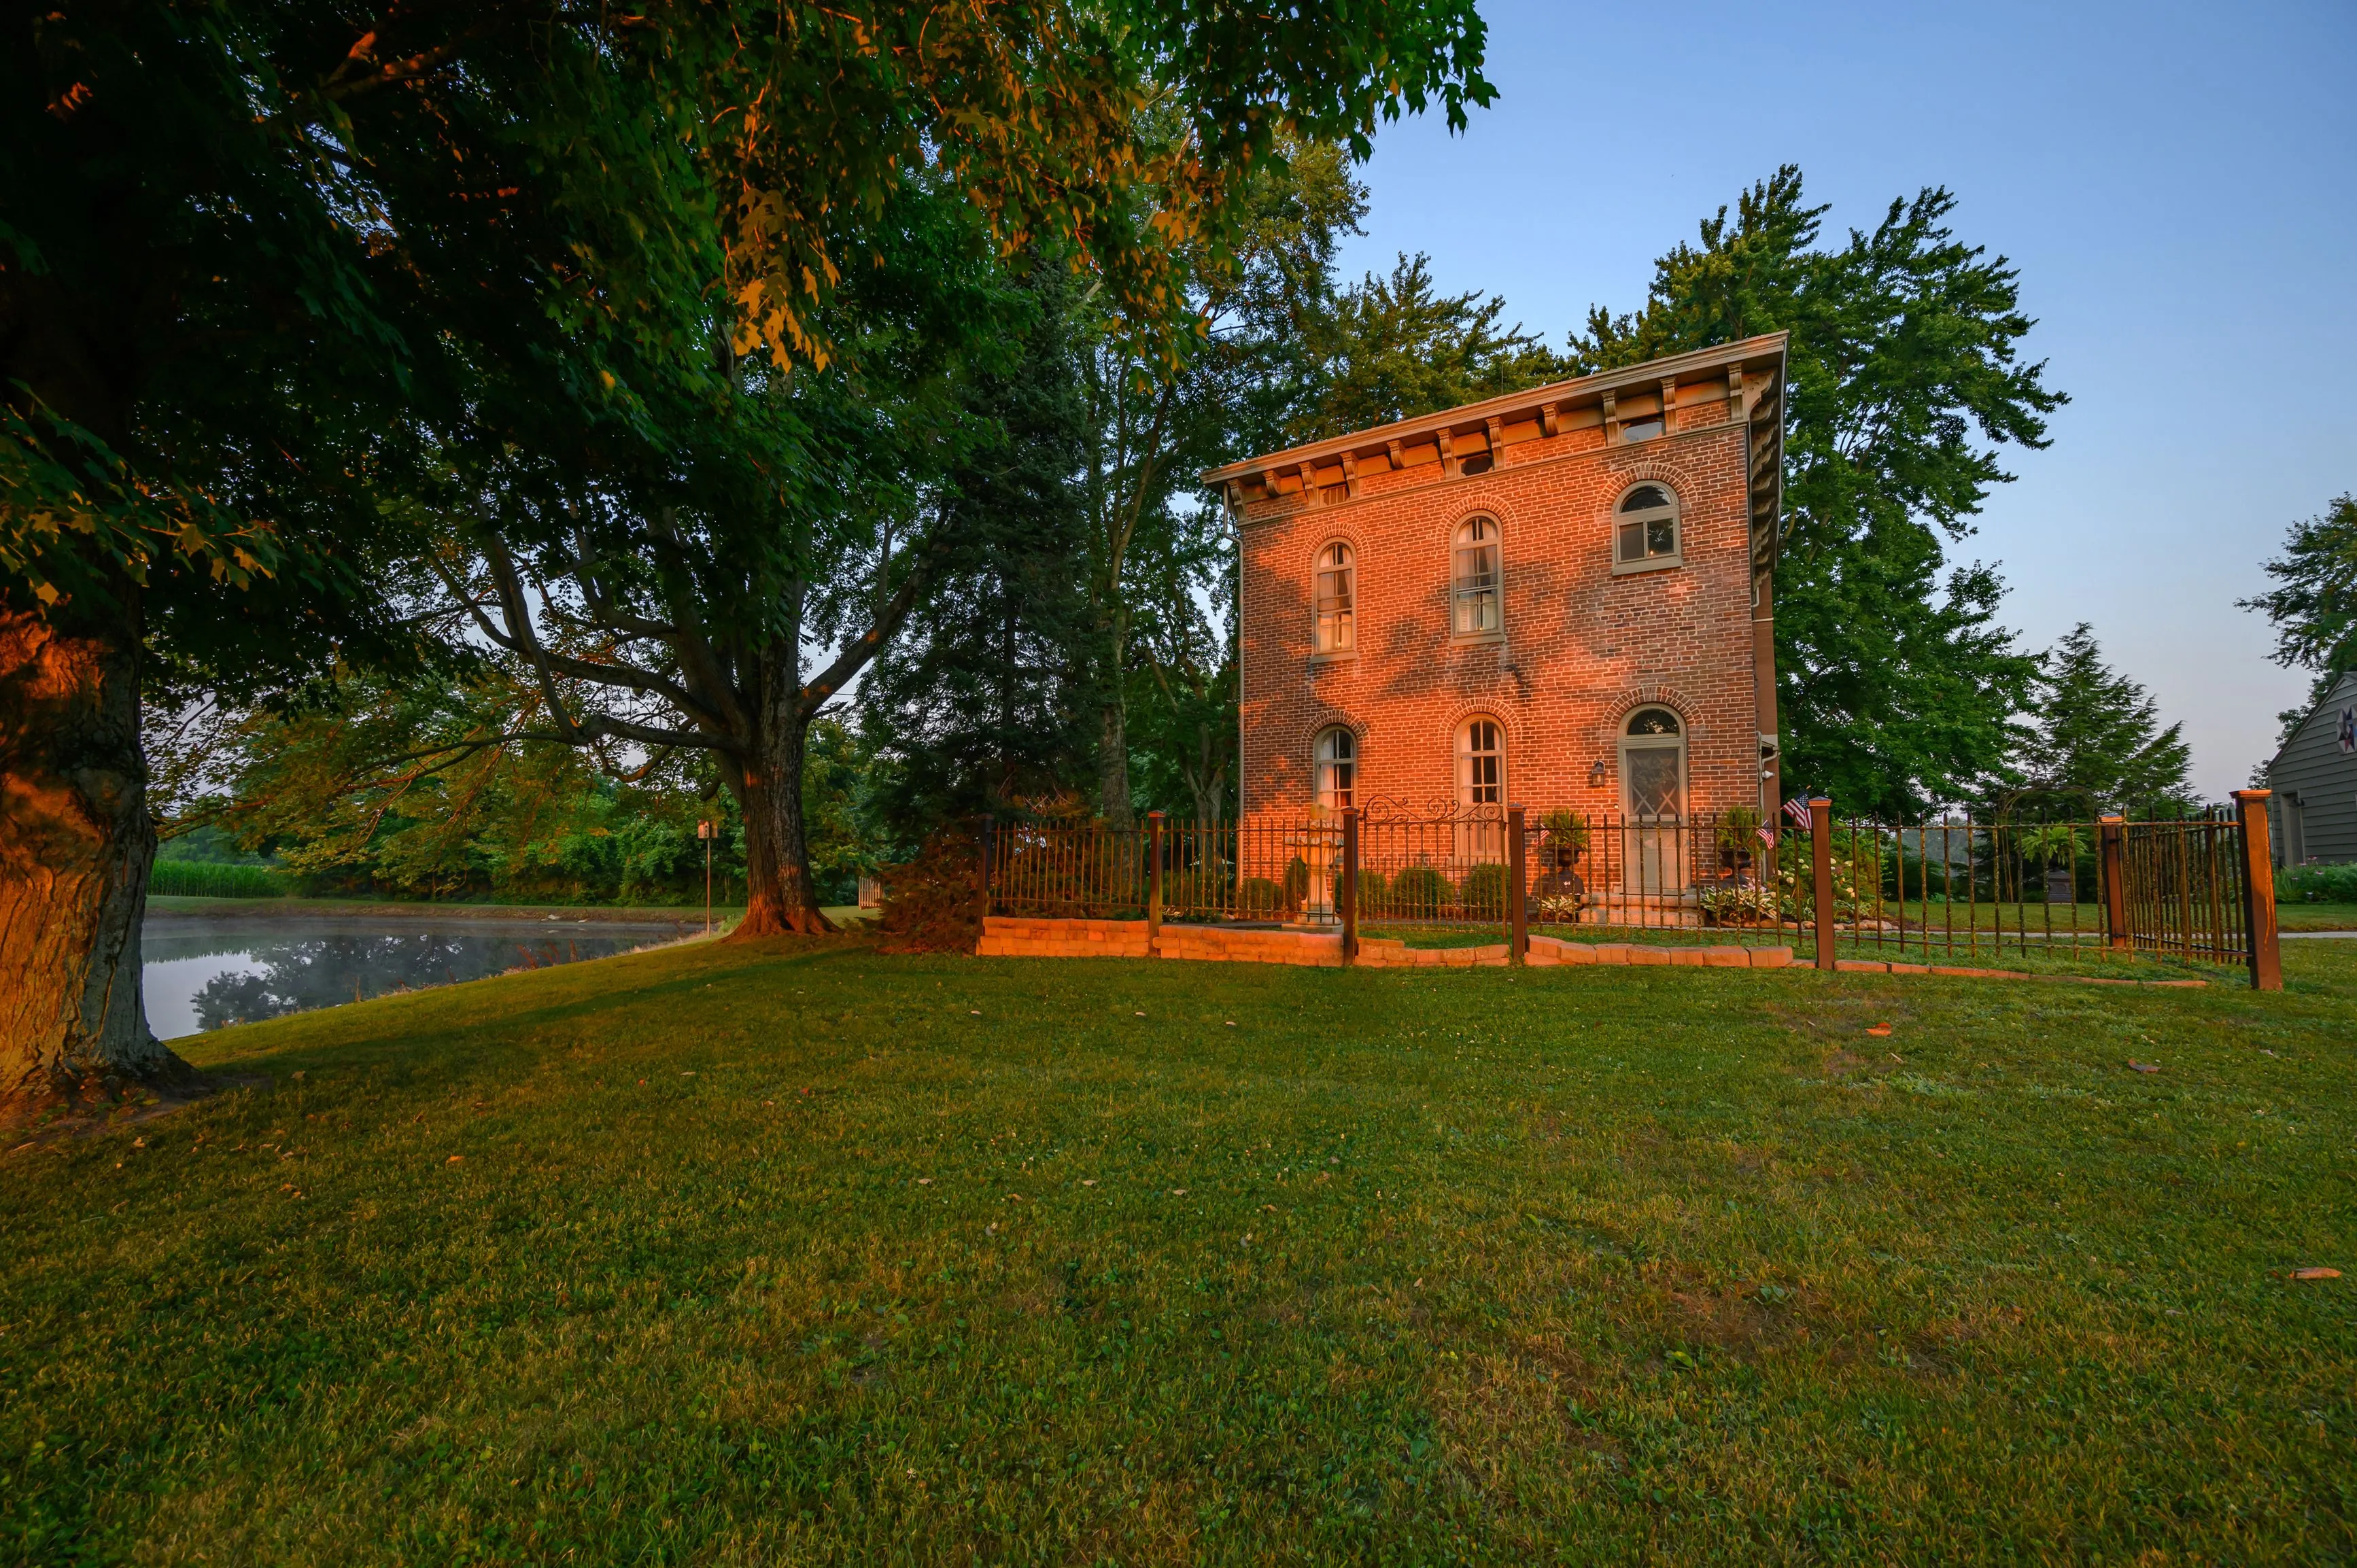 Brick building with wrought iron fence at sunset, surrounded by green lawn and trees, with a pond in the background.